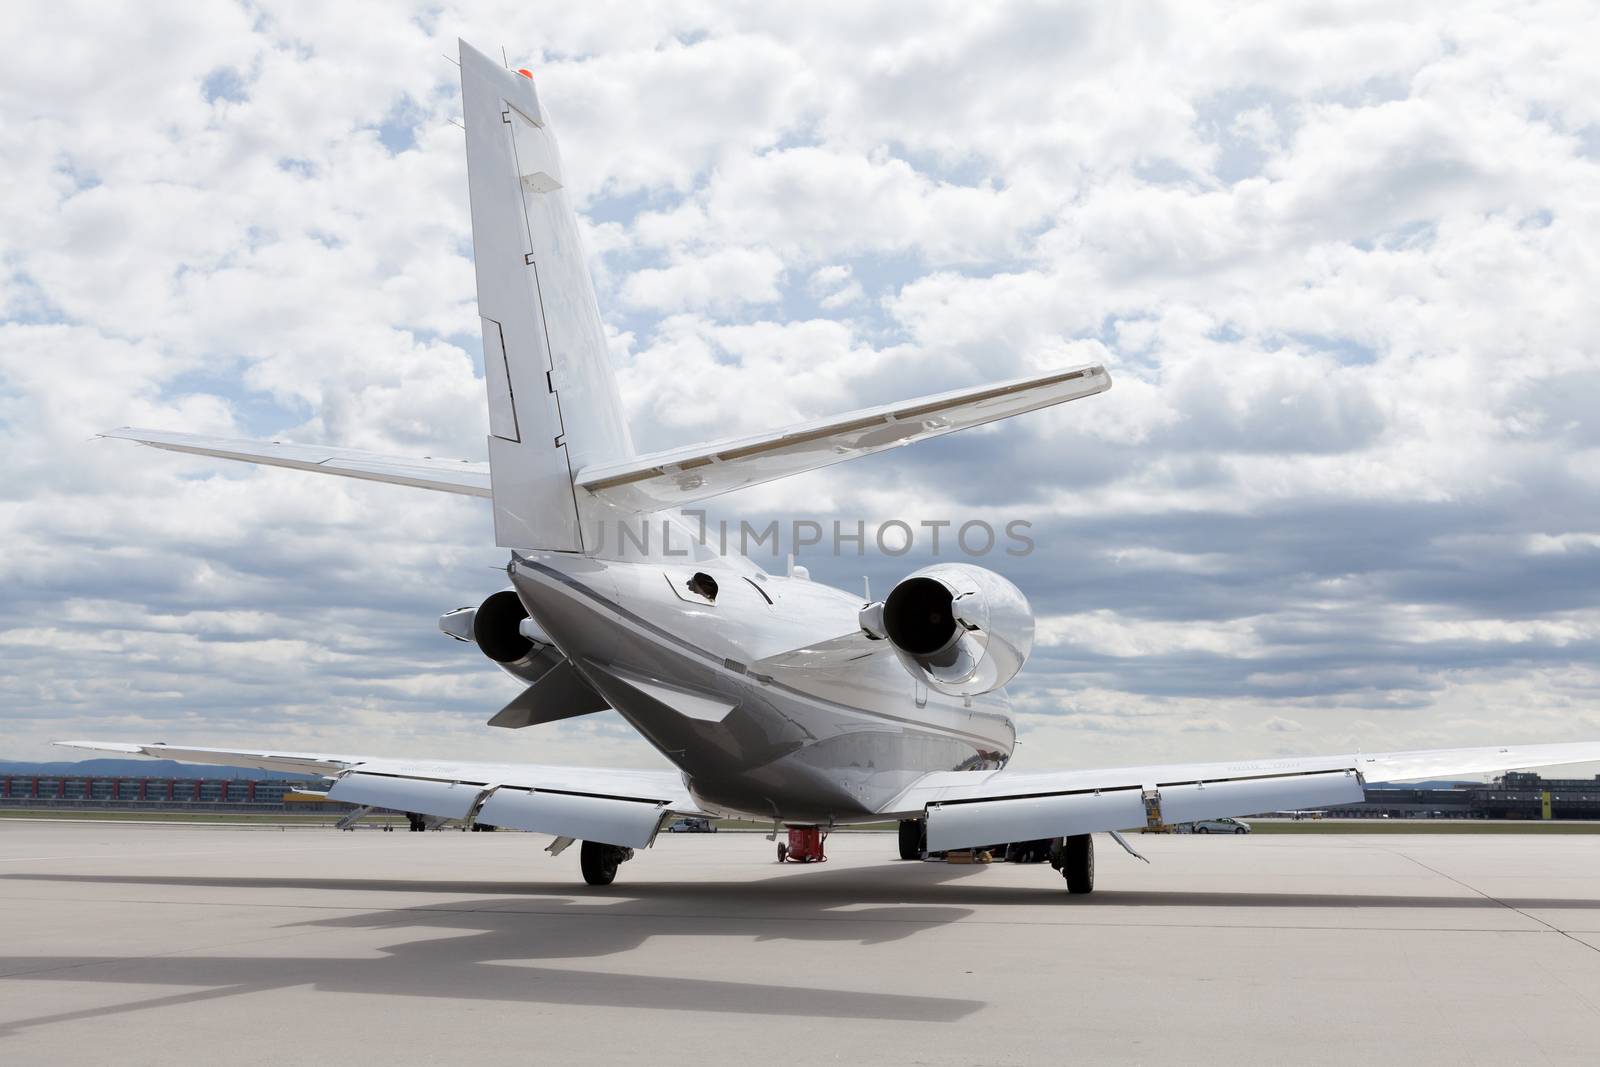 Aircraft learjet Plane in front of the Airport with cloudy sky and sun